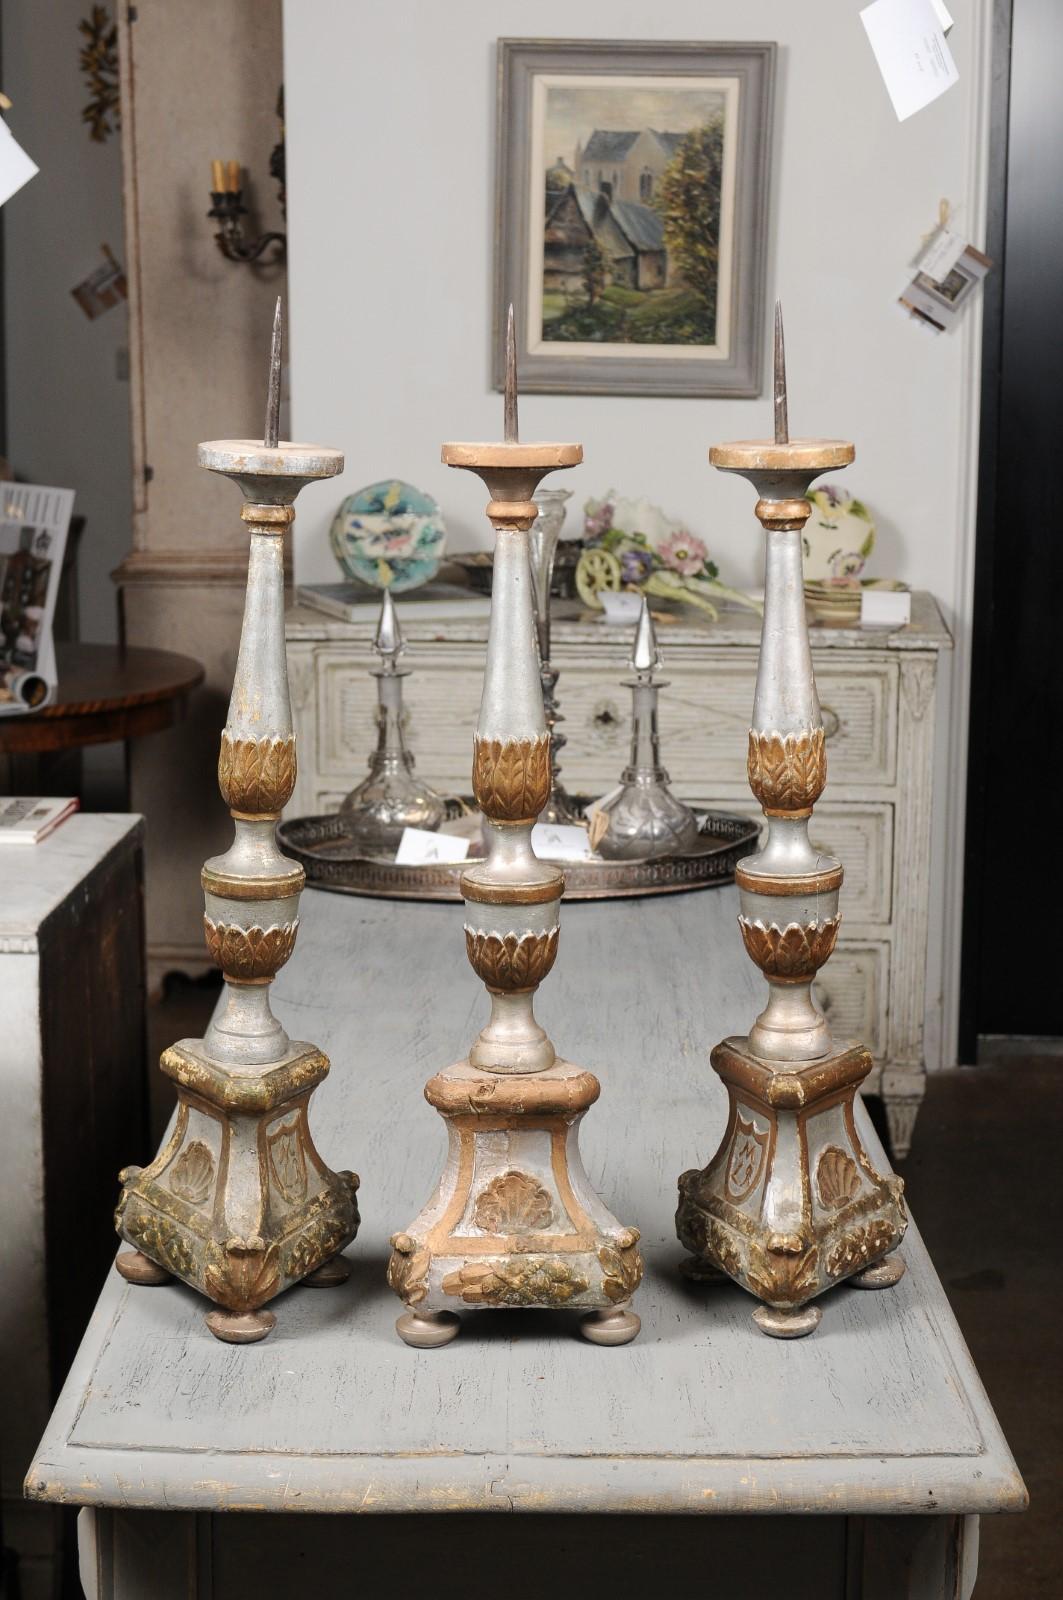 Three Italian silver gilt and painted candlesticks from the 18th century, priced and sold individually. Born in Italy during the 18th century, each of these three wooden candlesticks boasts a lovely silver gilt structure, adorned with painted